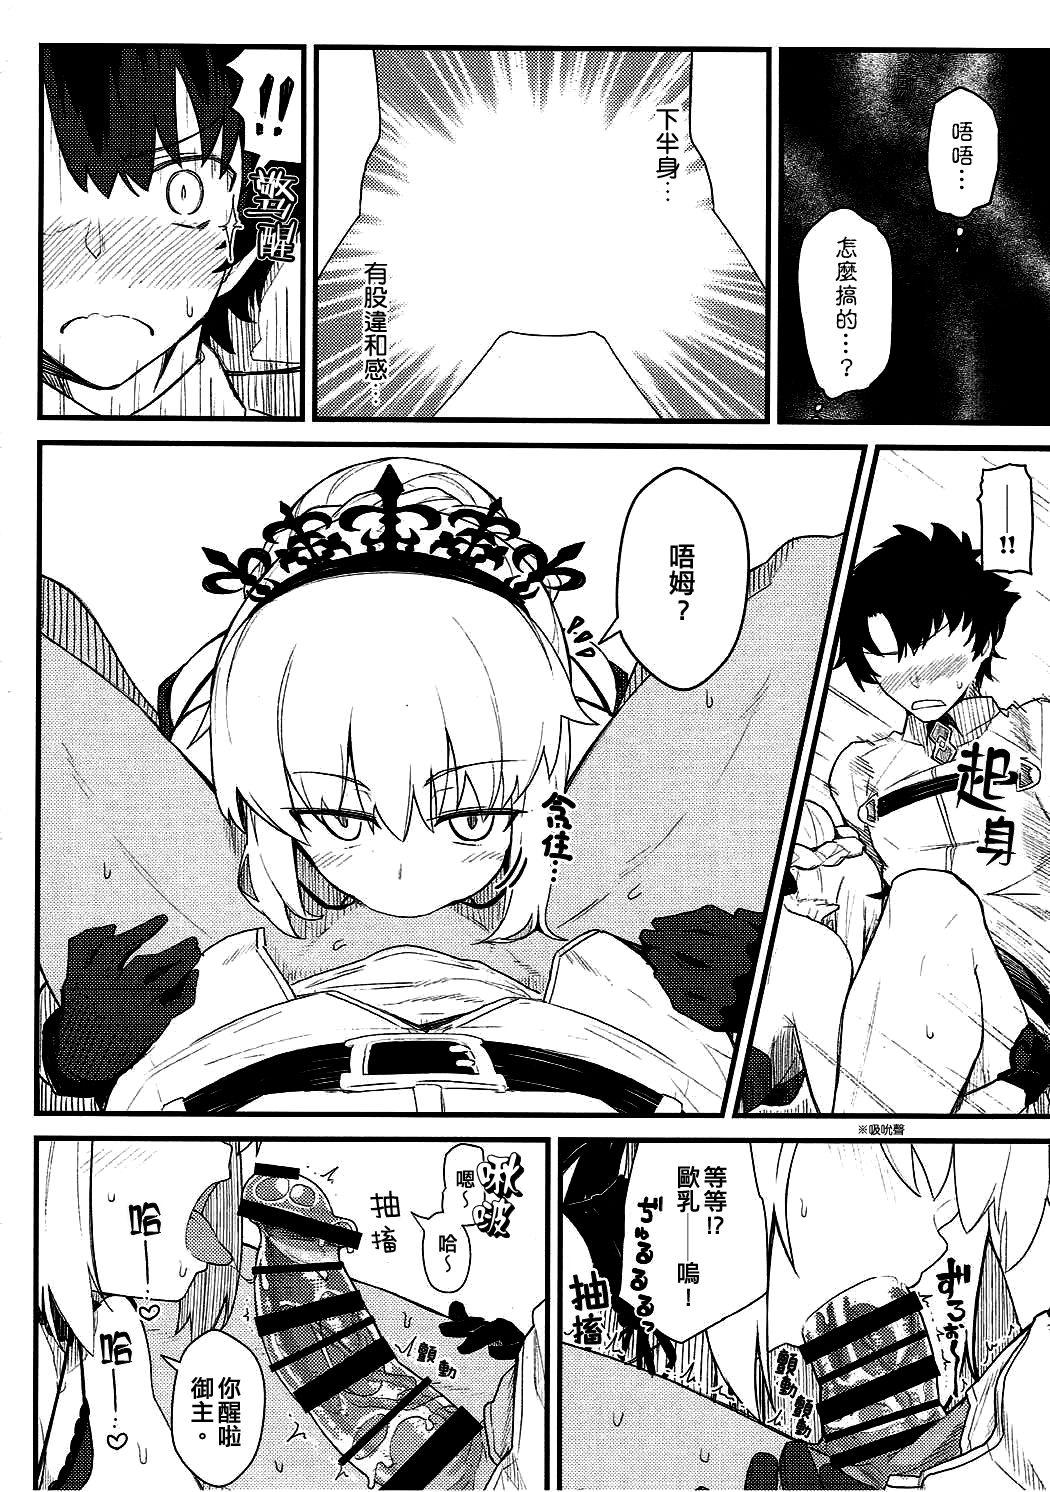 Gostosas GIRLFriend's 14 - Fate grand order Roleplay - Page 3